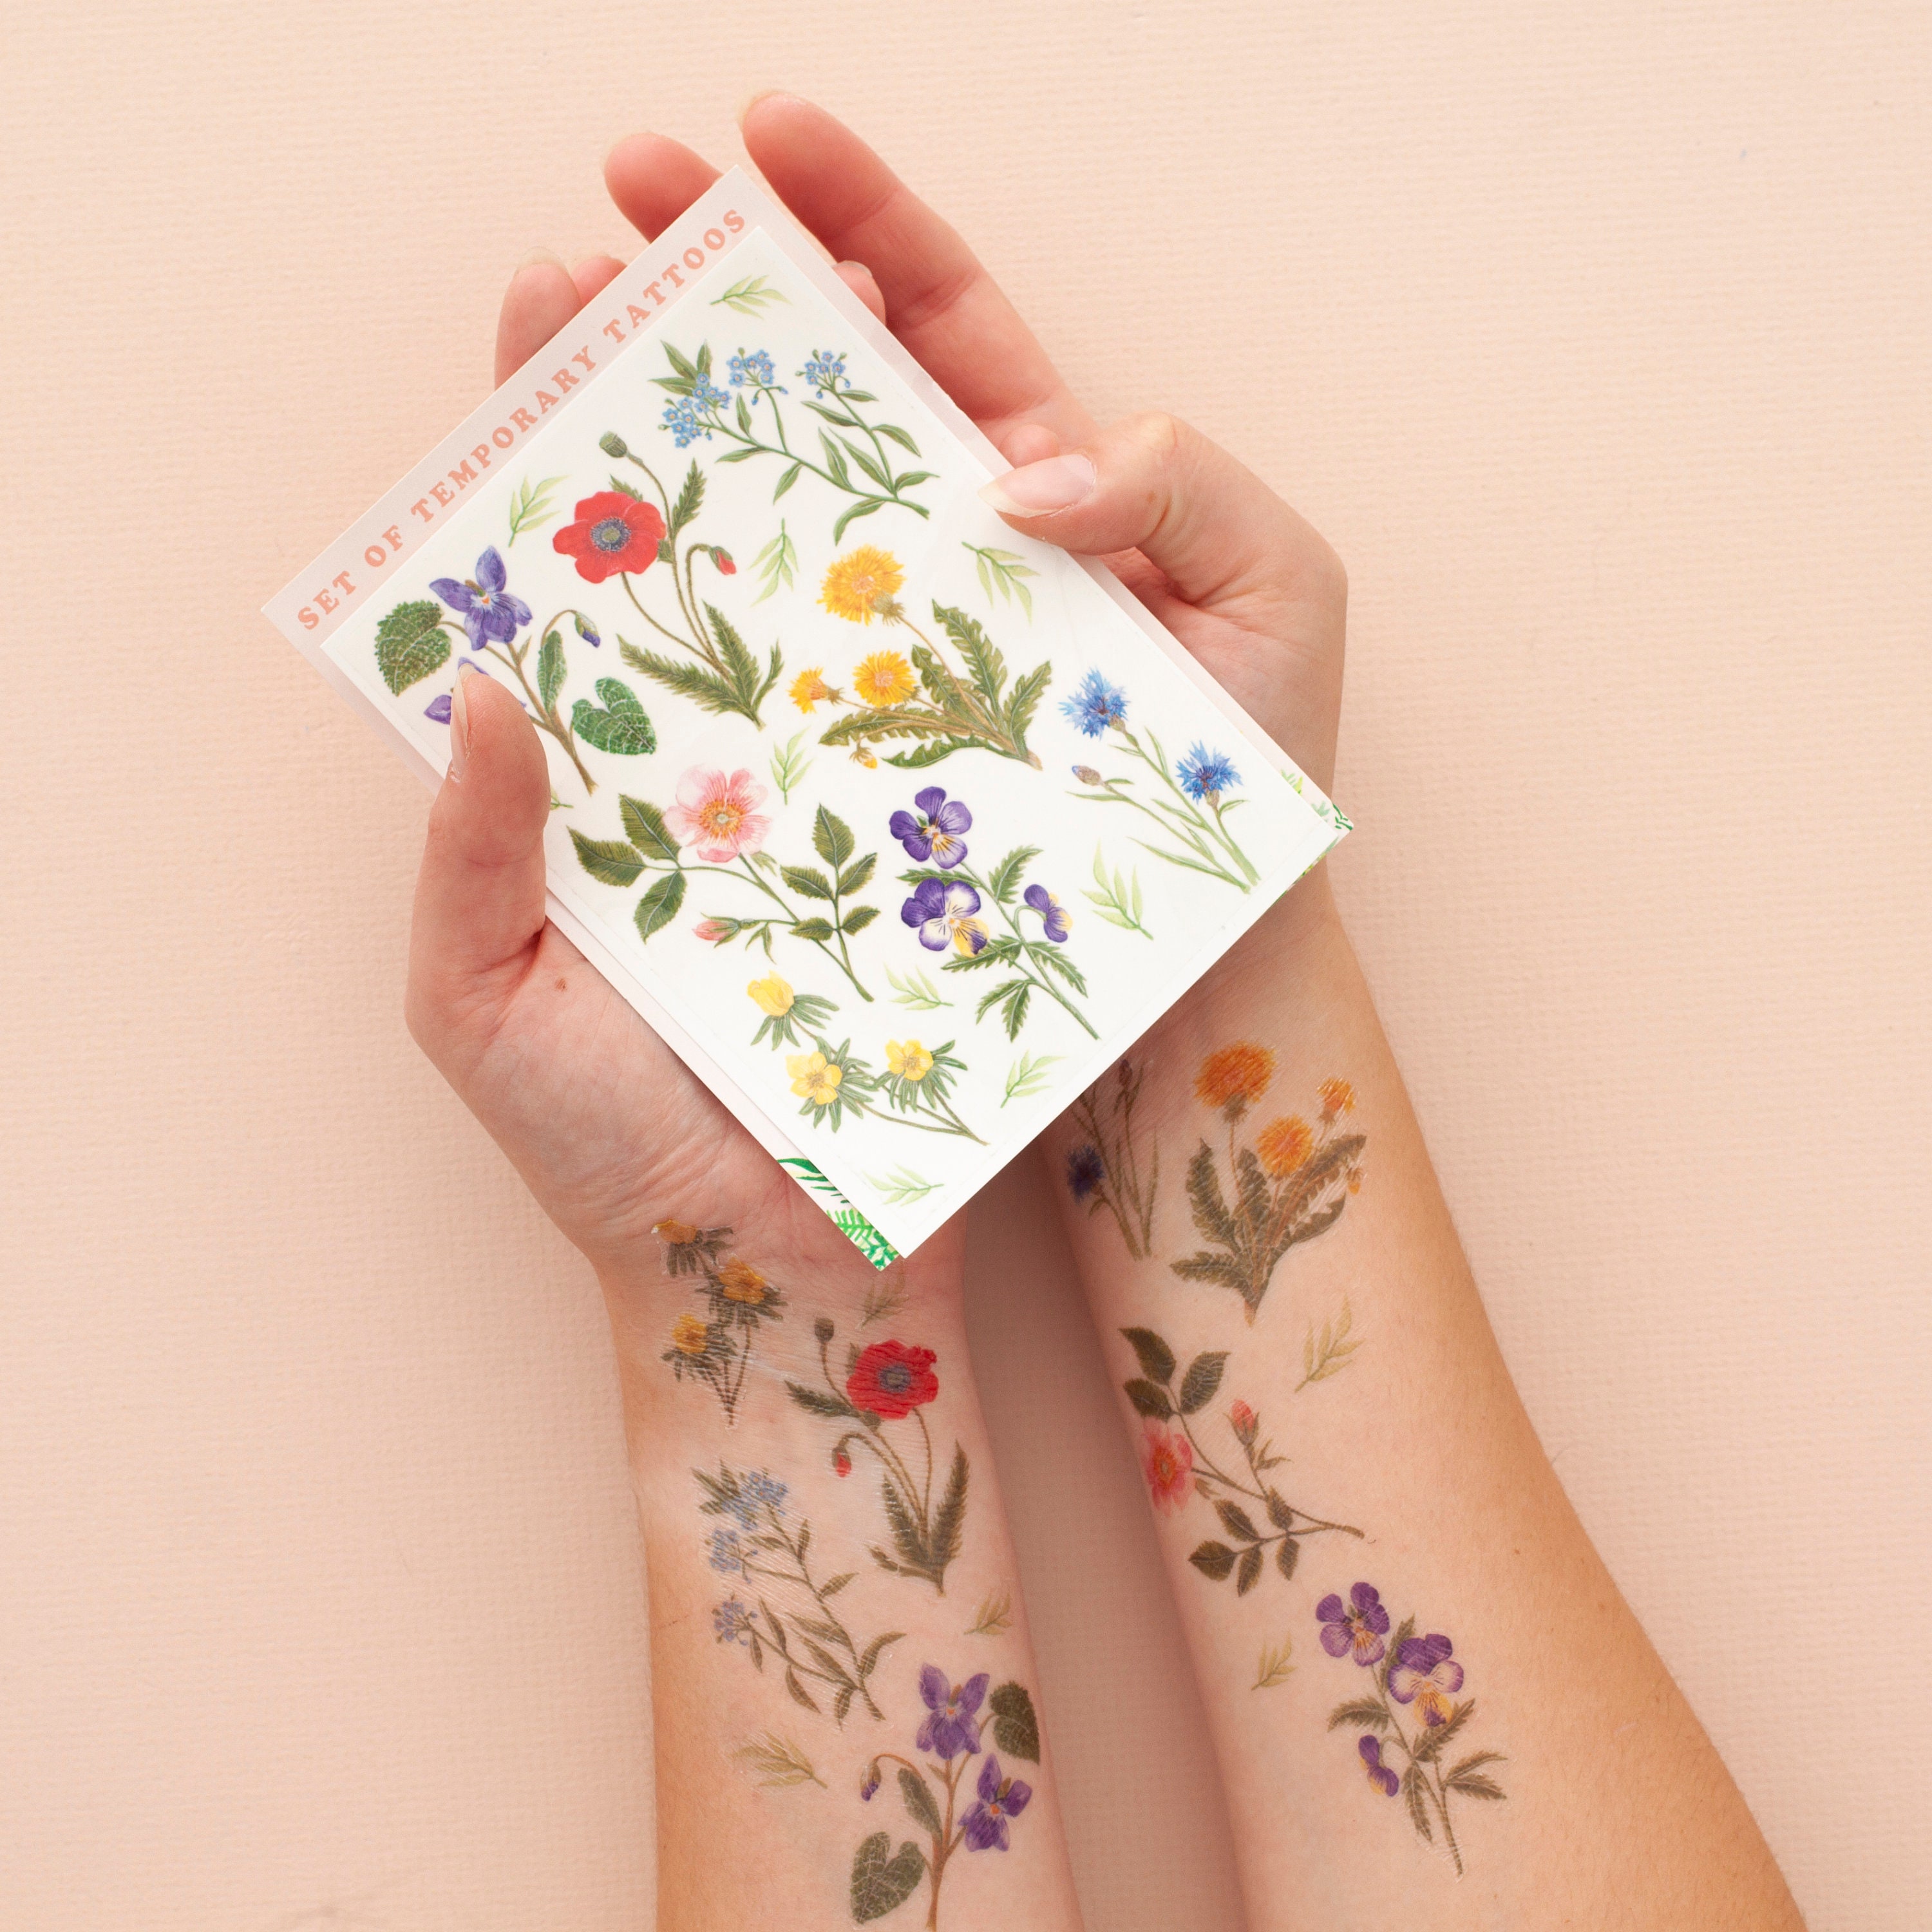 Temporary Tattoos Wild Thing Pack  Inked by Dani  Ulta Beauty